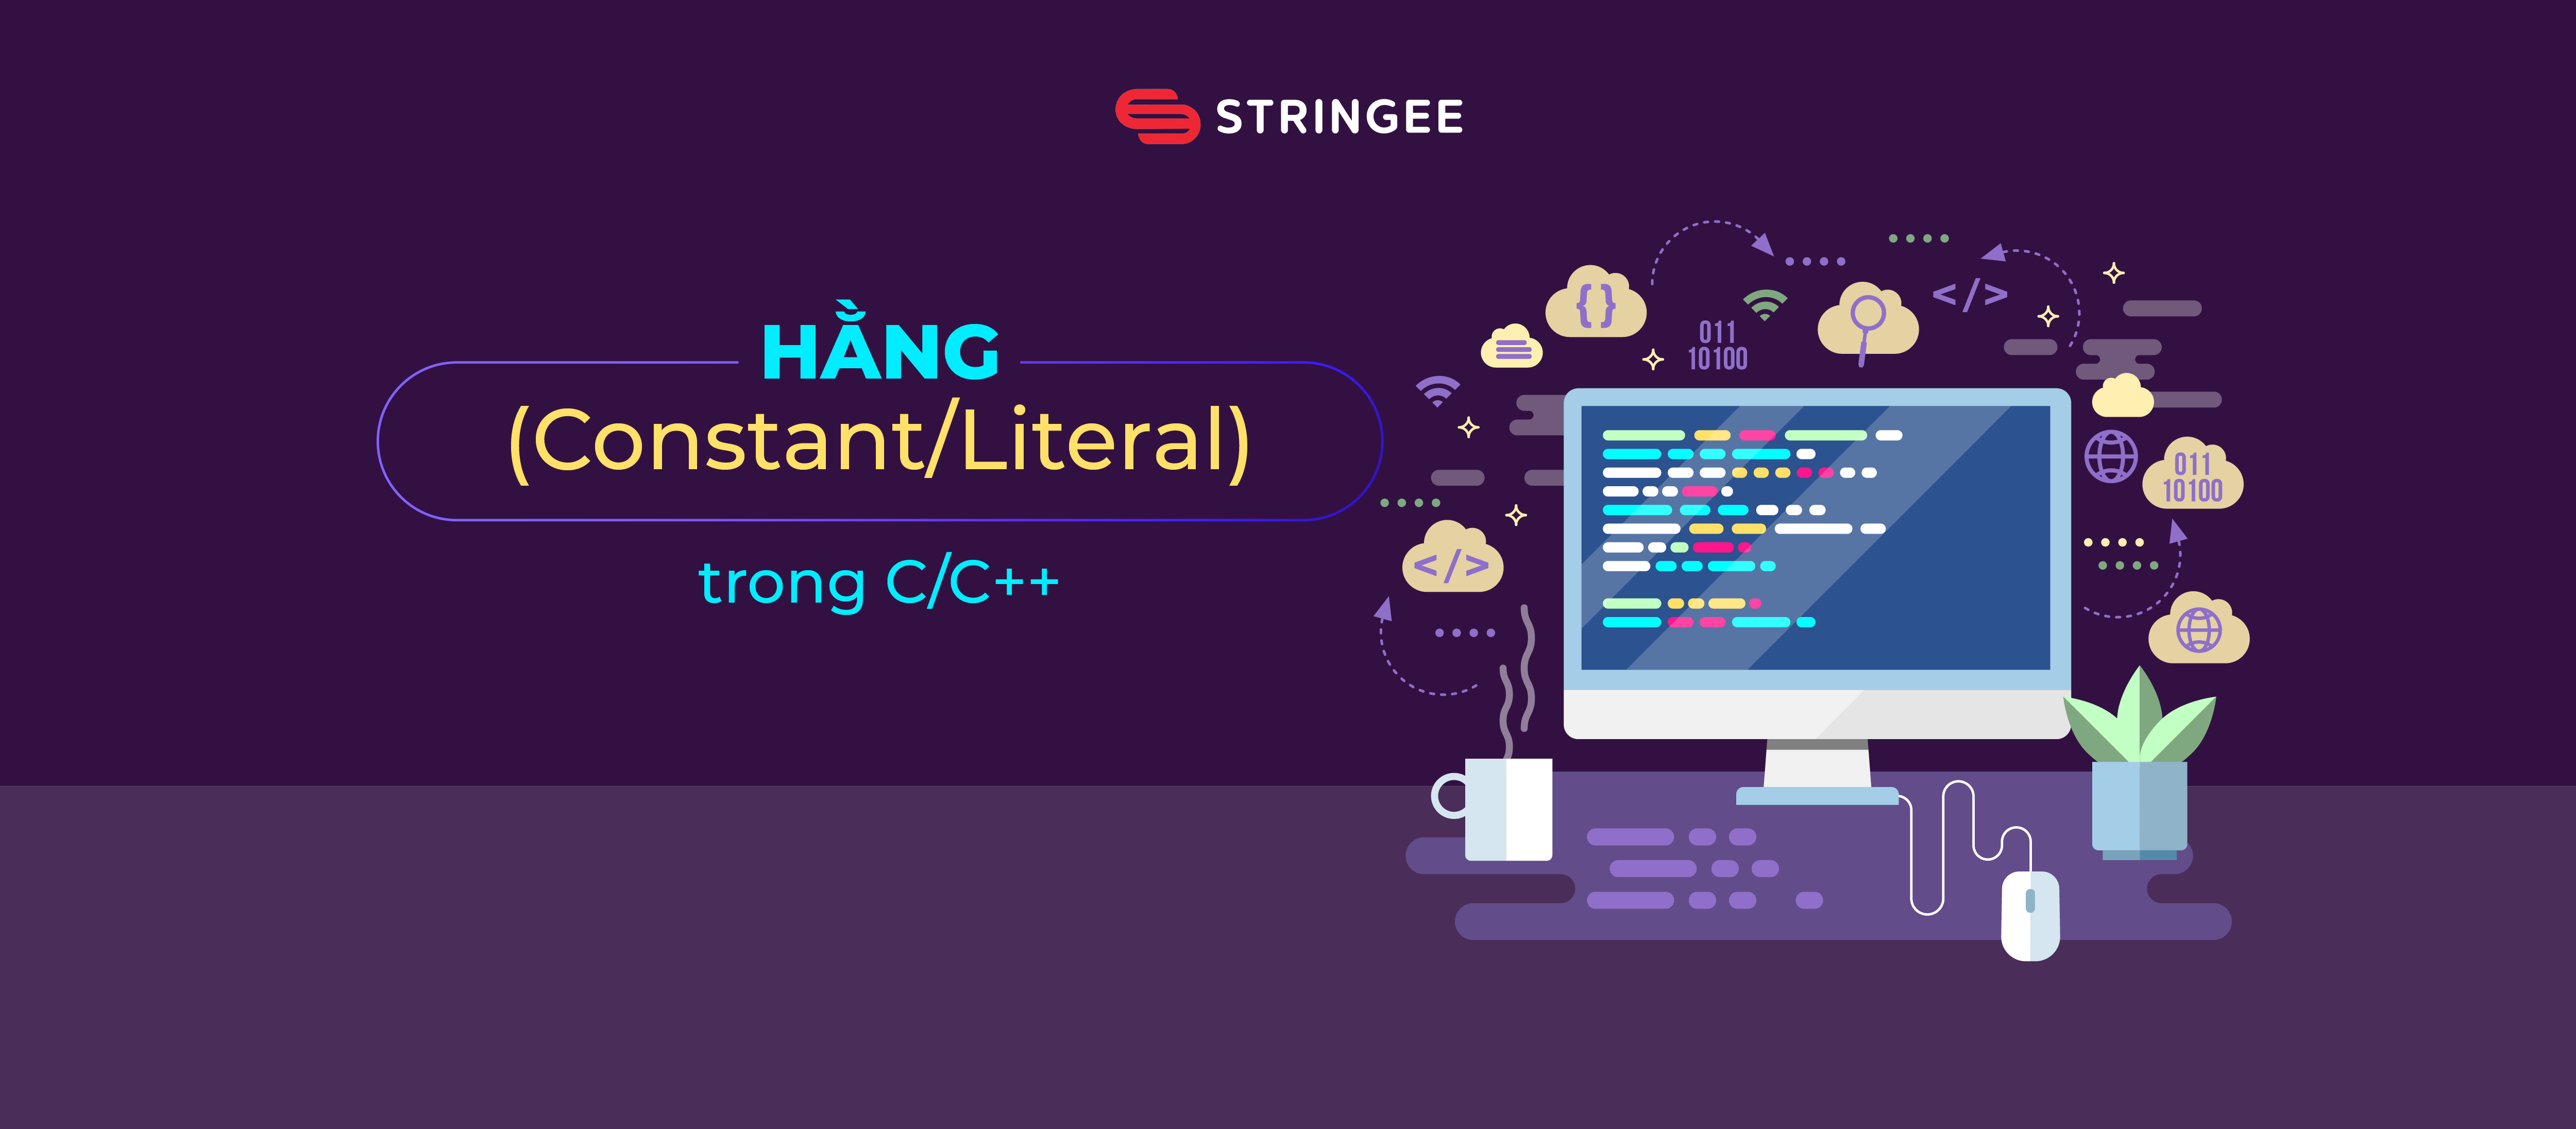 Hằng (Constant/Literal) trong C/C++